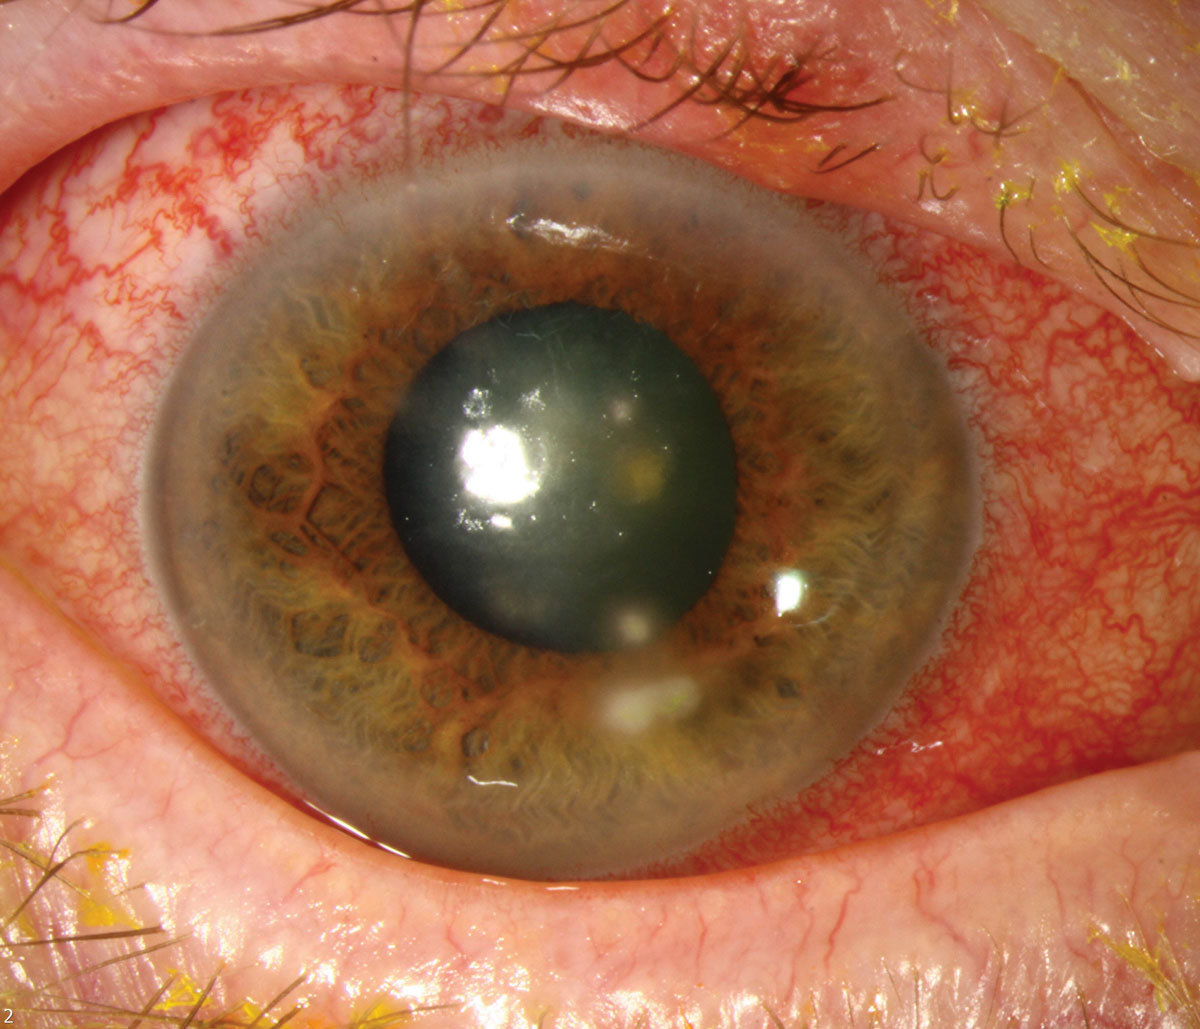 This patient has HSV keratitis with stromal infiltrates.